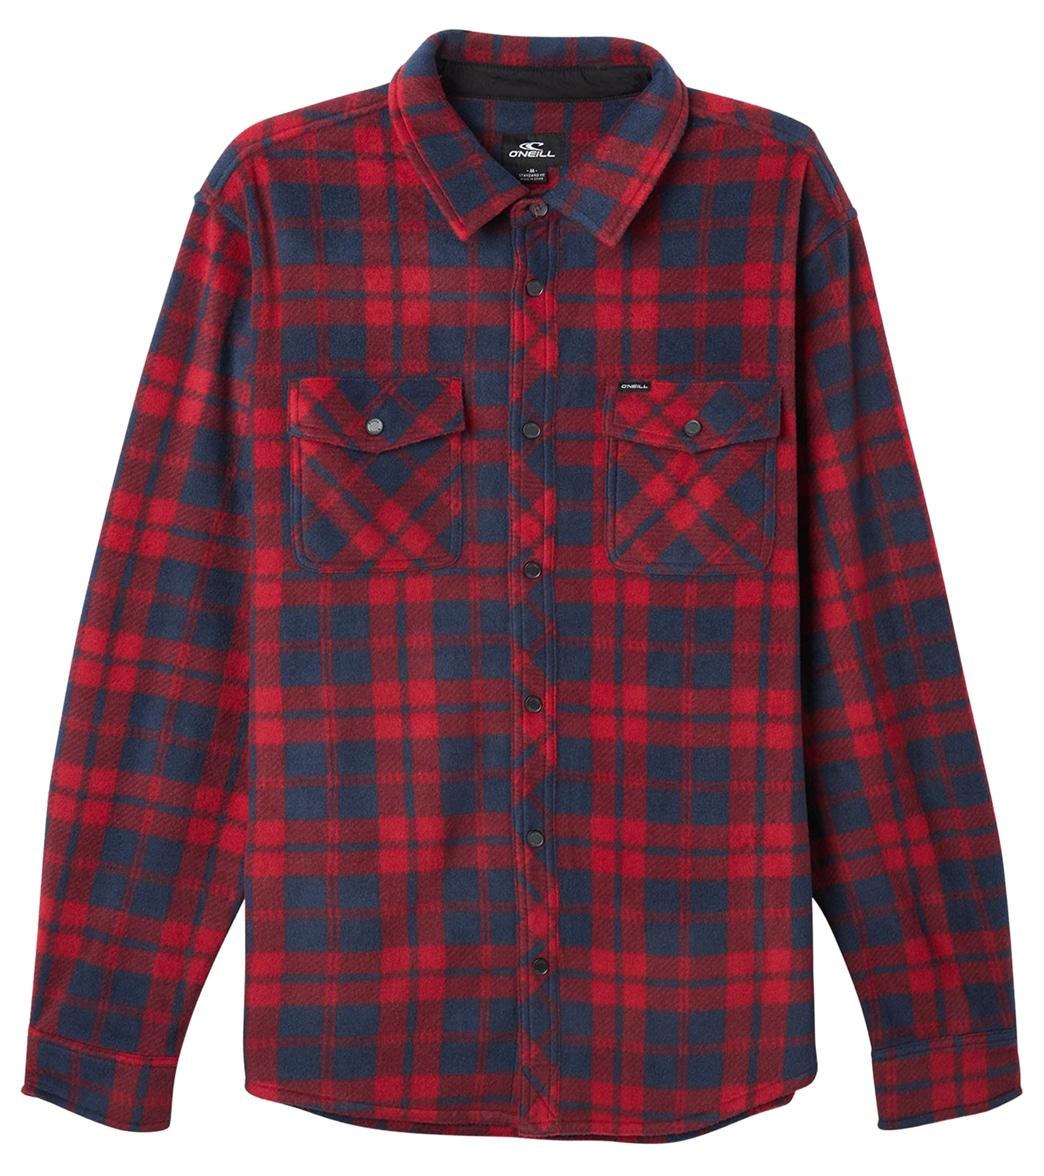 O'neill Men's Glacier Plaid Long Sleeve Shirt - Red Large Polyester - Swimoutlet.com